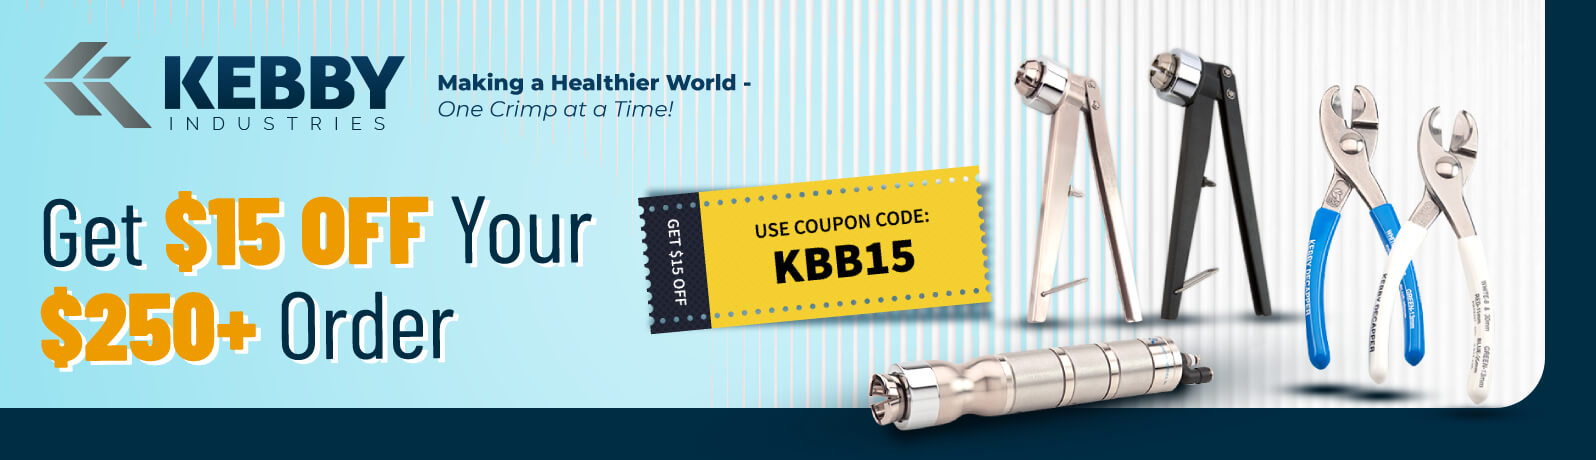 Get $15 OFF Your $250+ Order of Selected Kebby Industries Products!